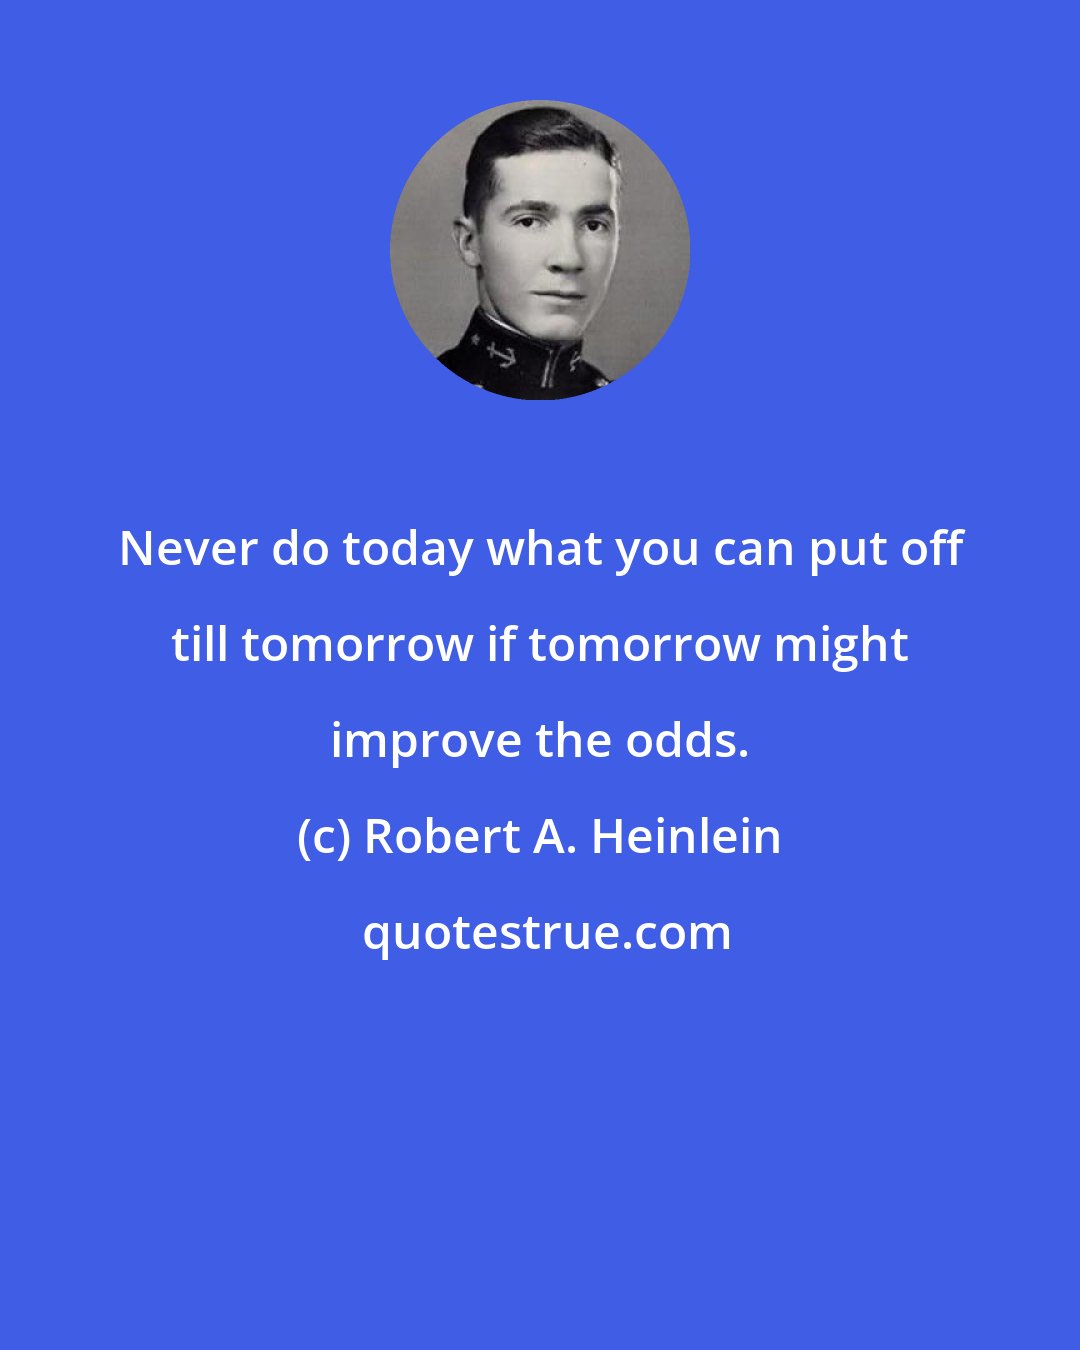 Robert A. Heinlein: Never do today what you can put off till tomorrow if tomorrow might improve the odds.